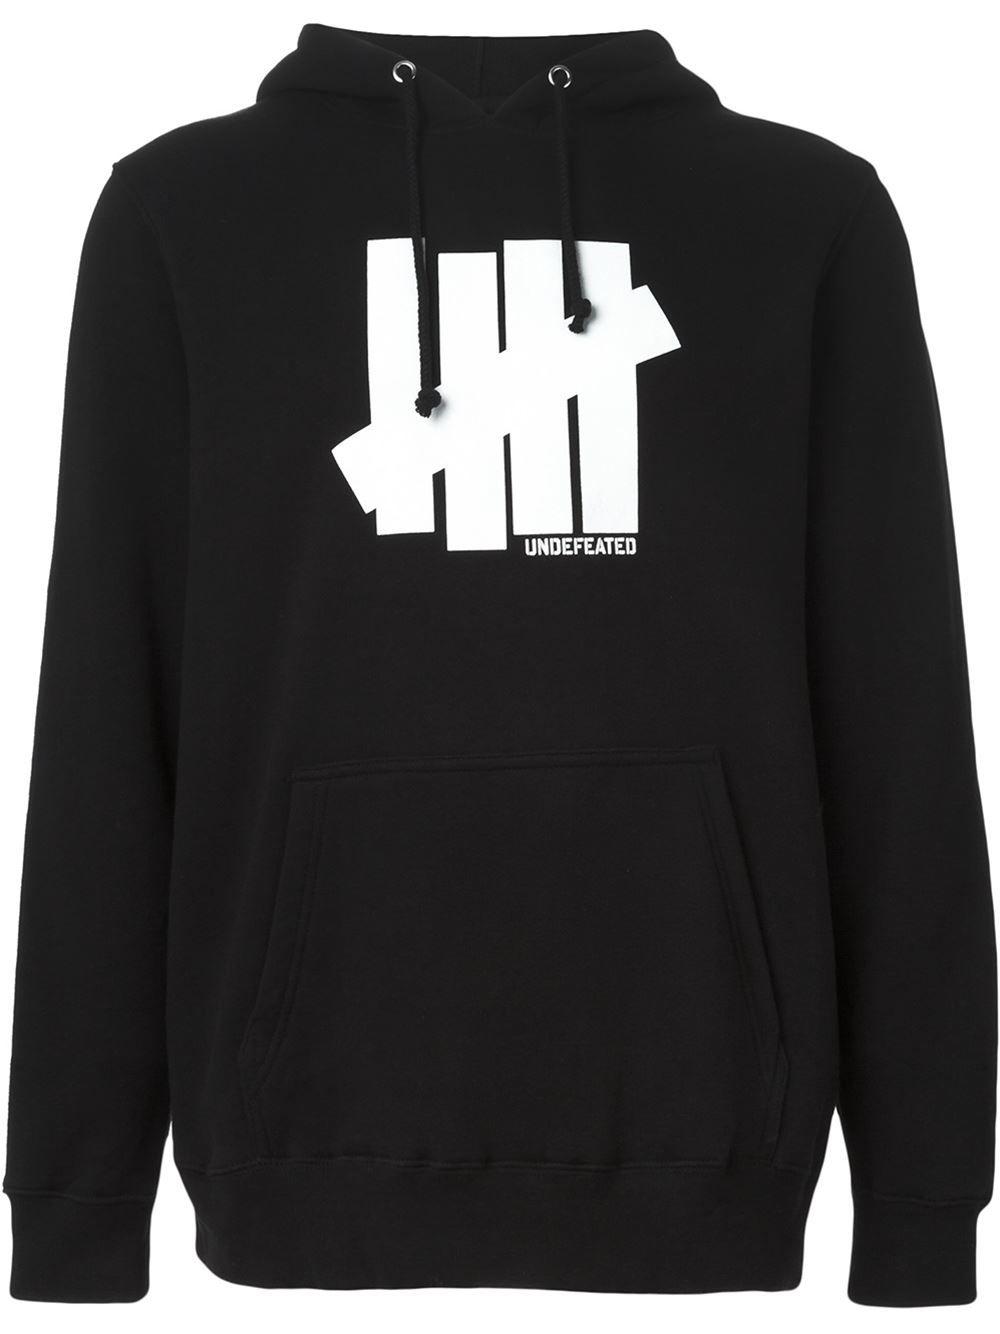 Undefeated Clothing Logo - Undefeated Logo Print Hoodie in Black for Men - Lyst